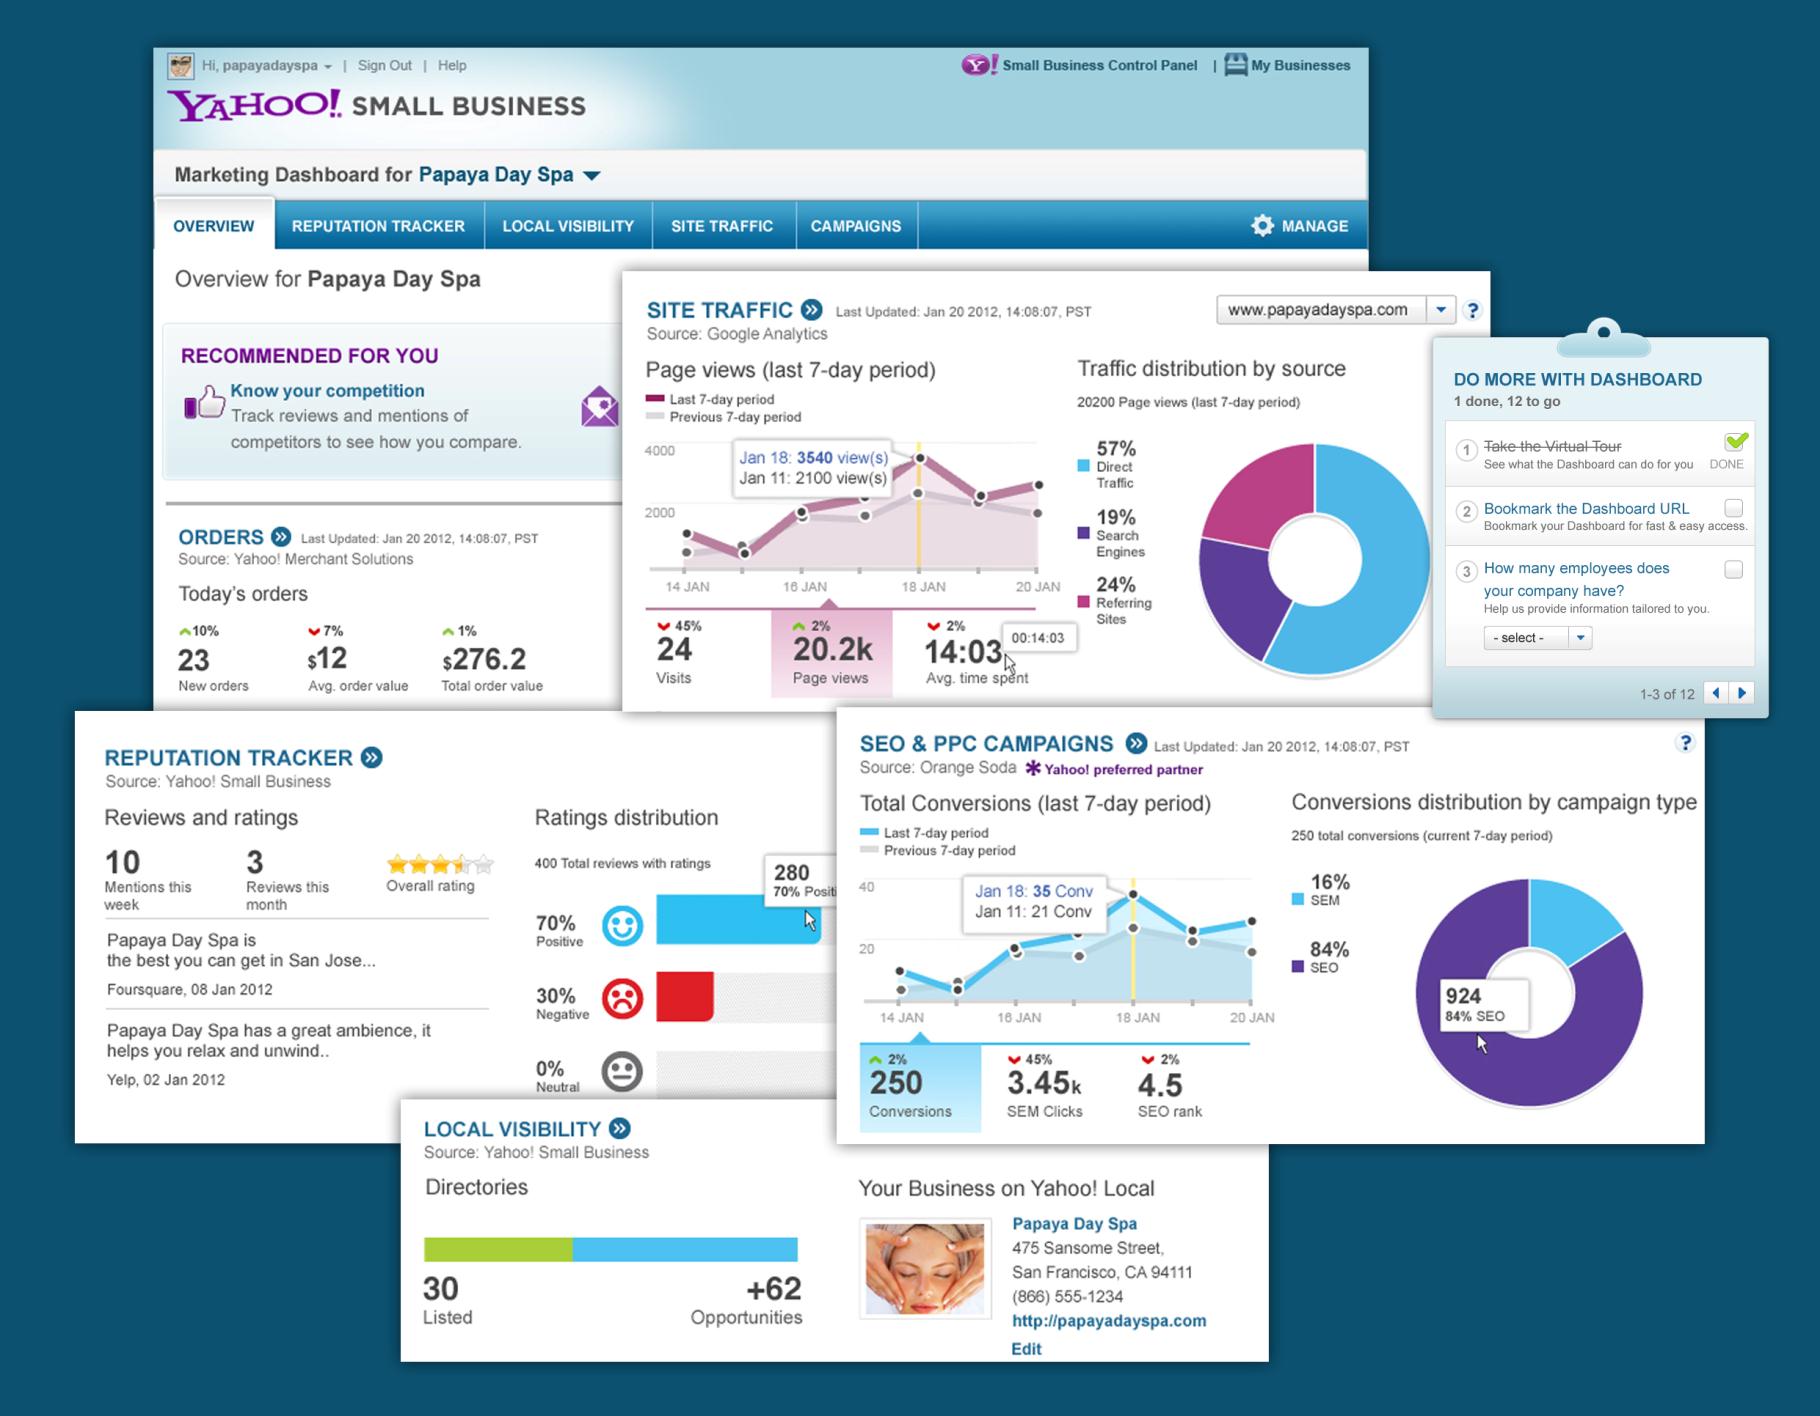 Business dashboards. Дашборд. Дашборд маркетинг. Дашборд маркетолога. Дашборды для маркетолога.